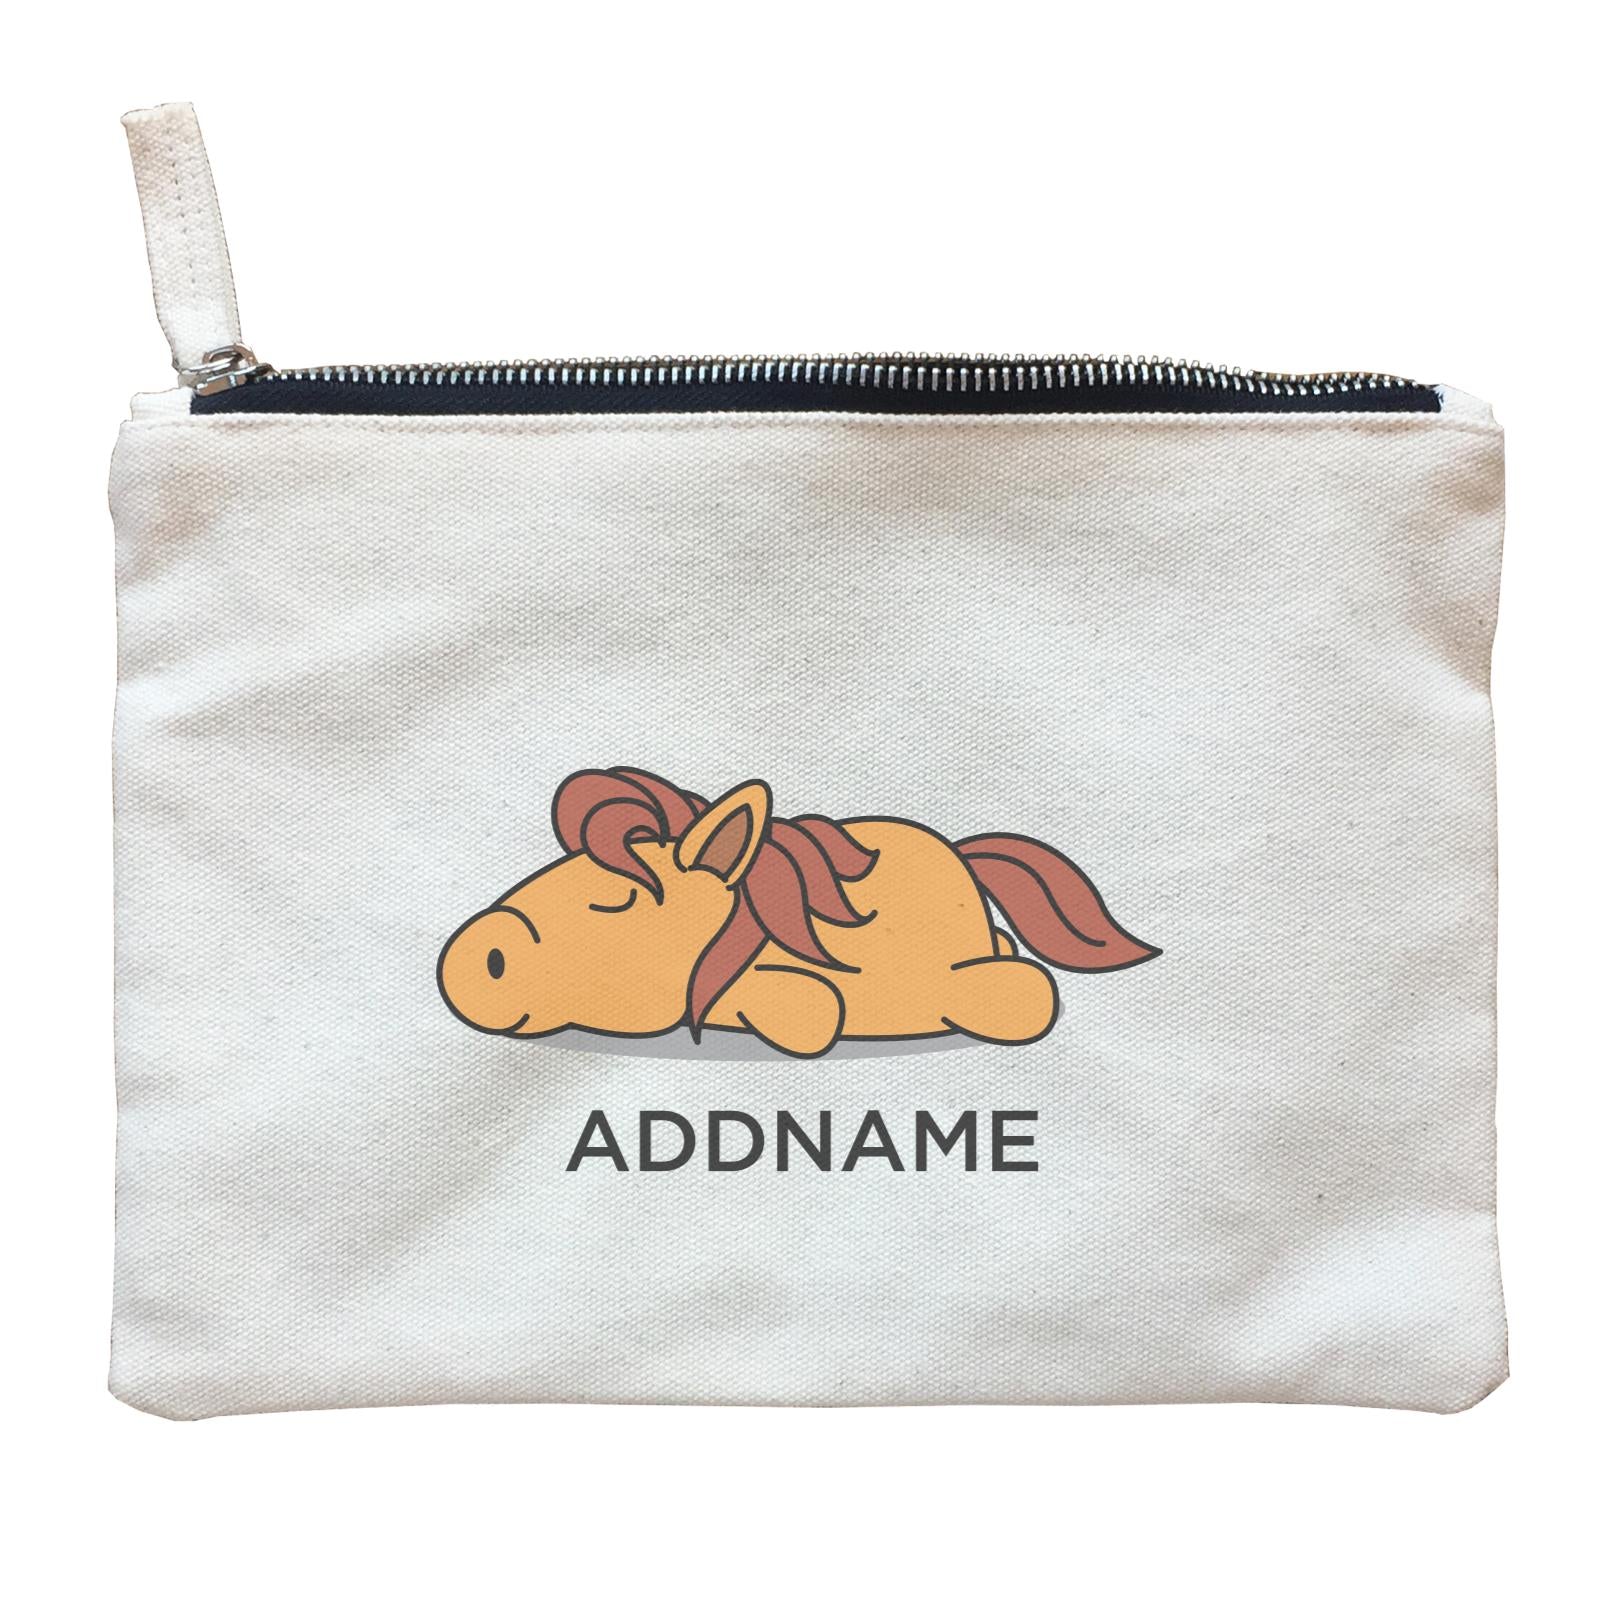 Lazy Horse Addname Zipper Pouch